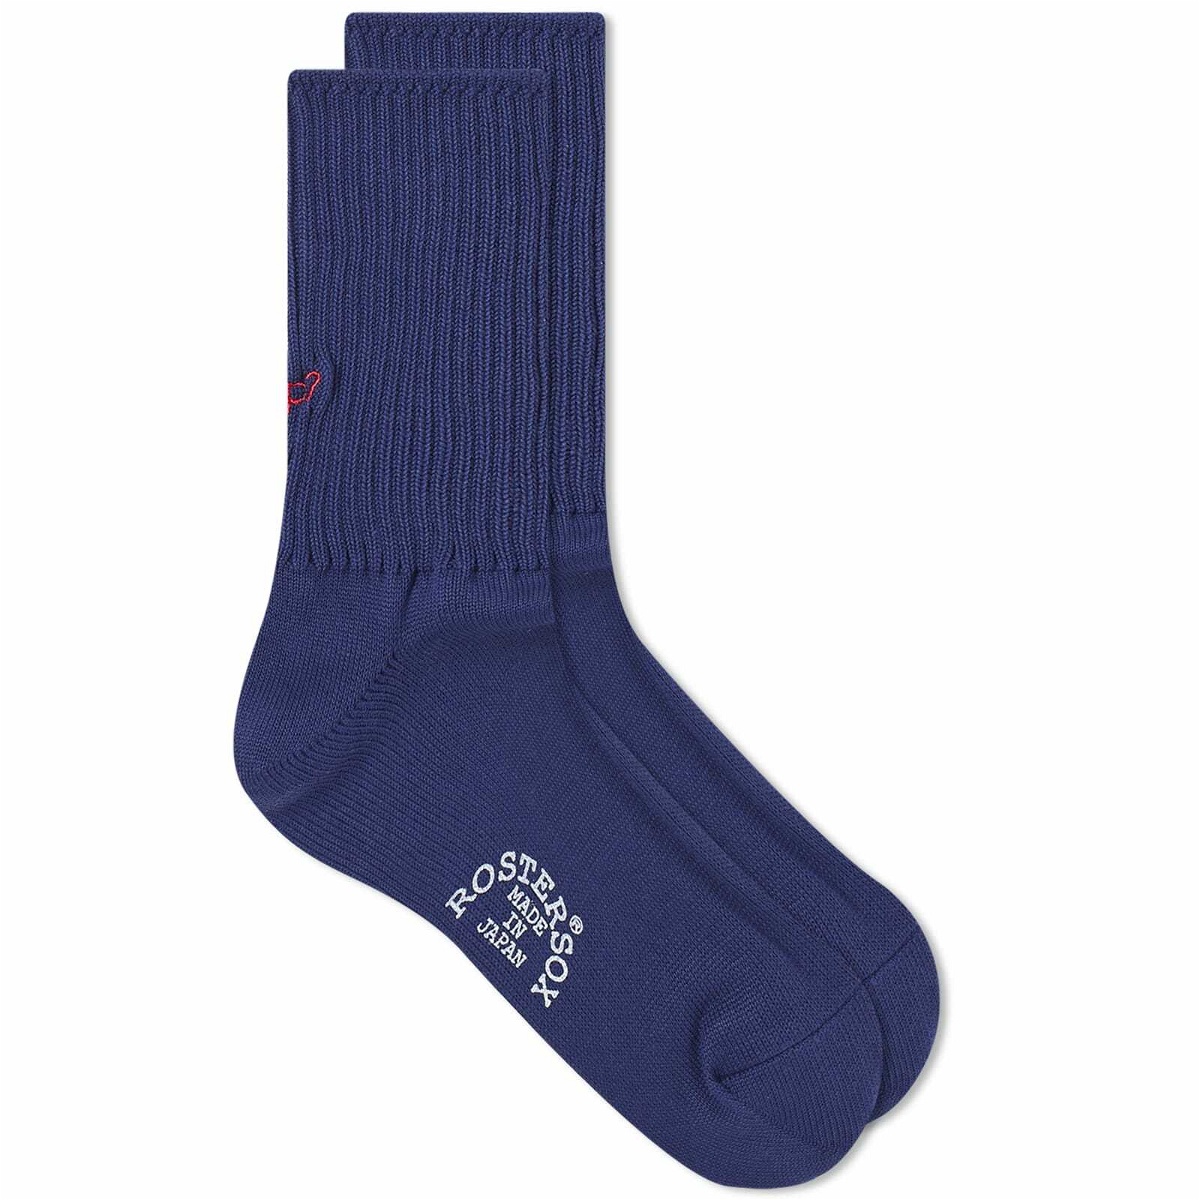 Rostersox What's Up Socks in Navy Rostersox